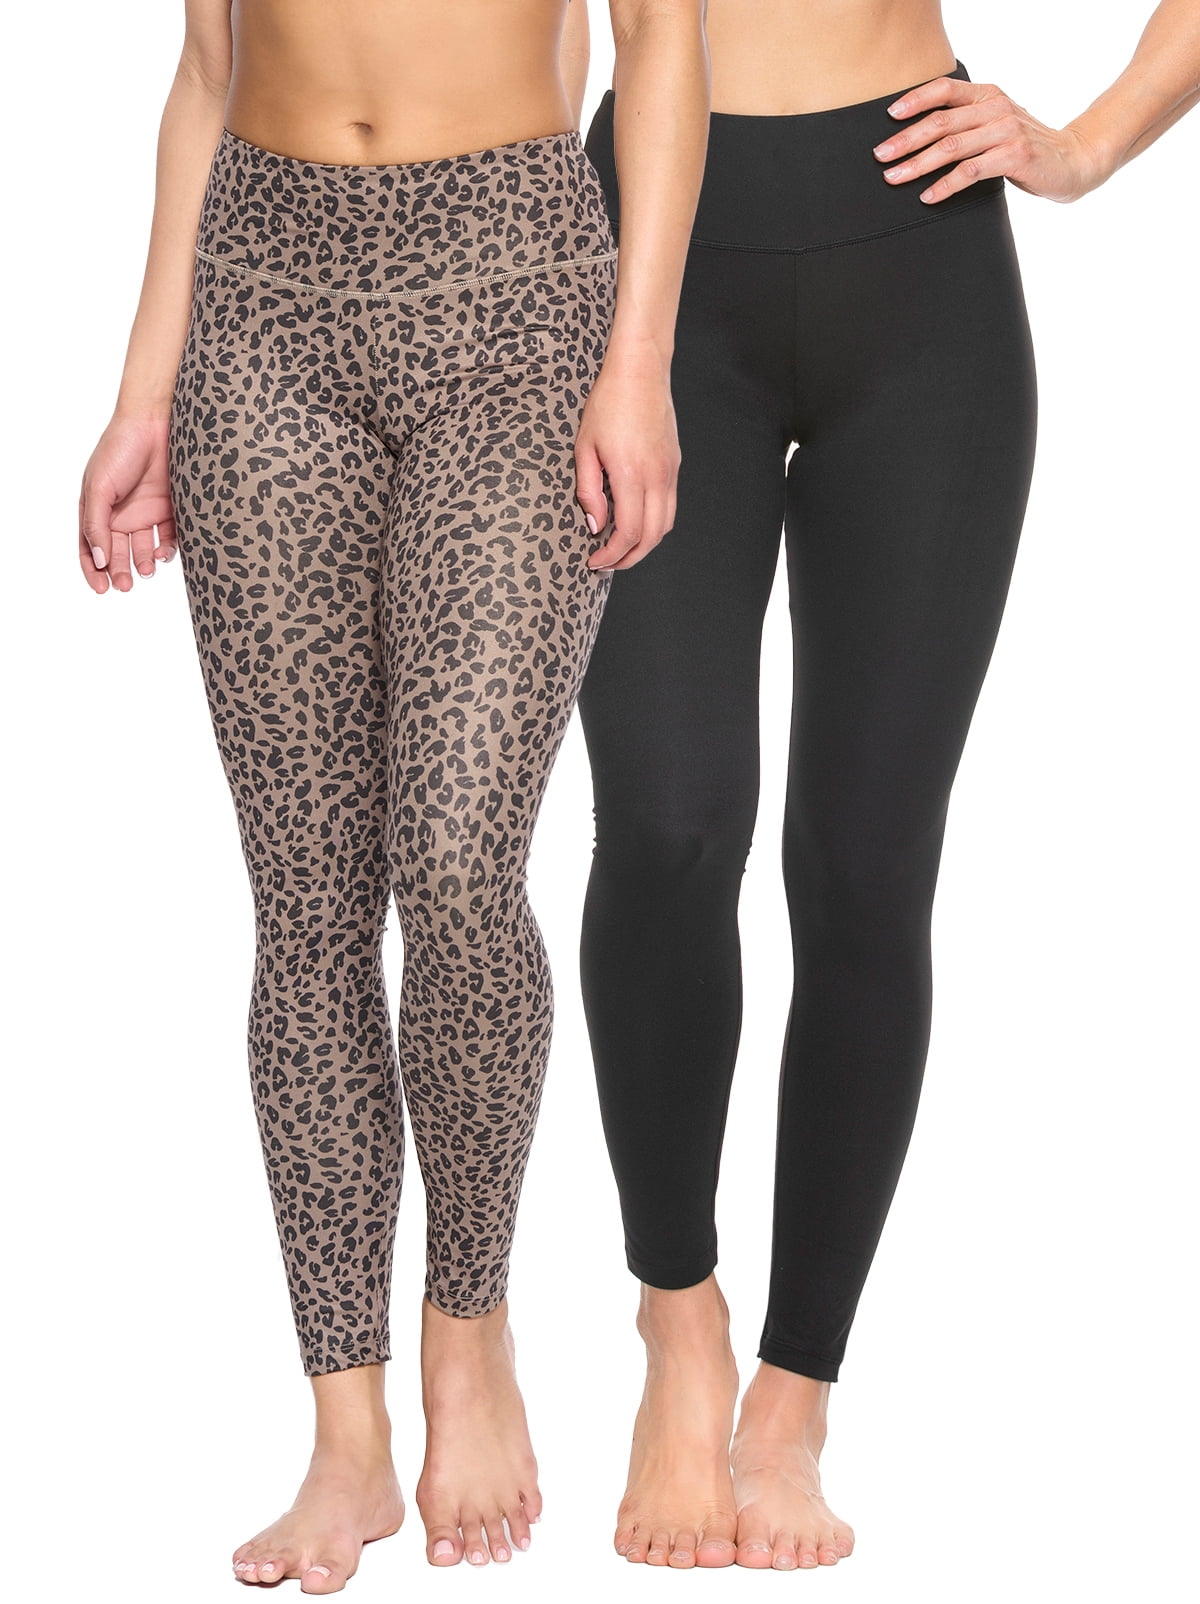 Felina Sueded Athleisure Performance Legging (2-Pack) Womens Leggings  w/Slimming Waist Band Style: C3690RT (Raven Leopard Black, X-Small)